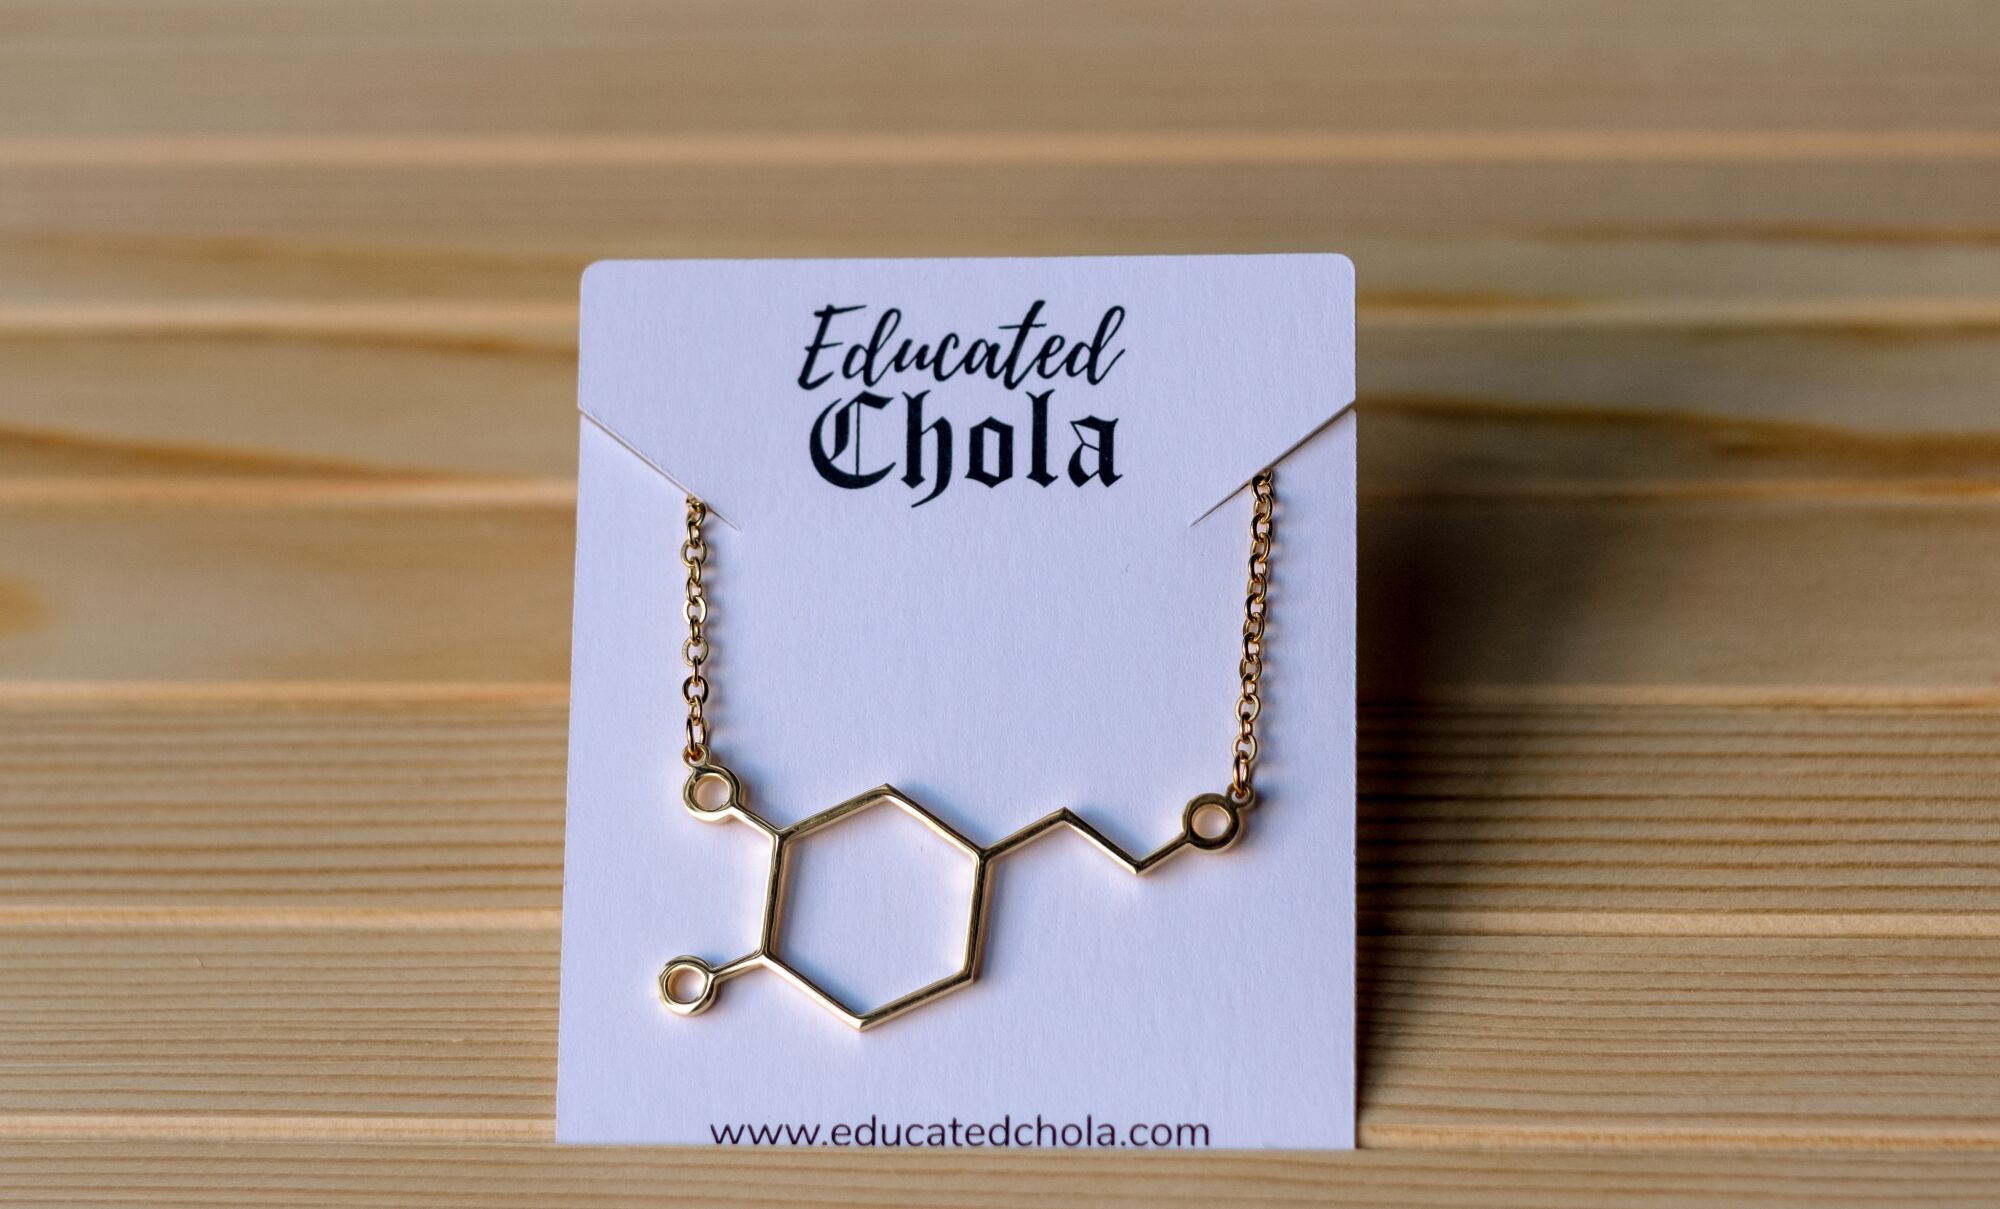 A gold Educated Chola necklace in the molecular structure of dopamine.